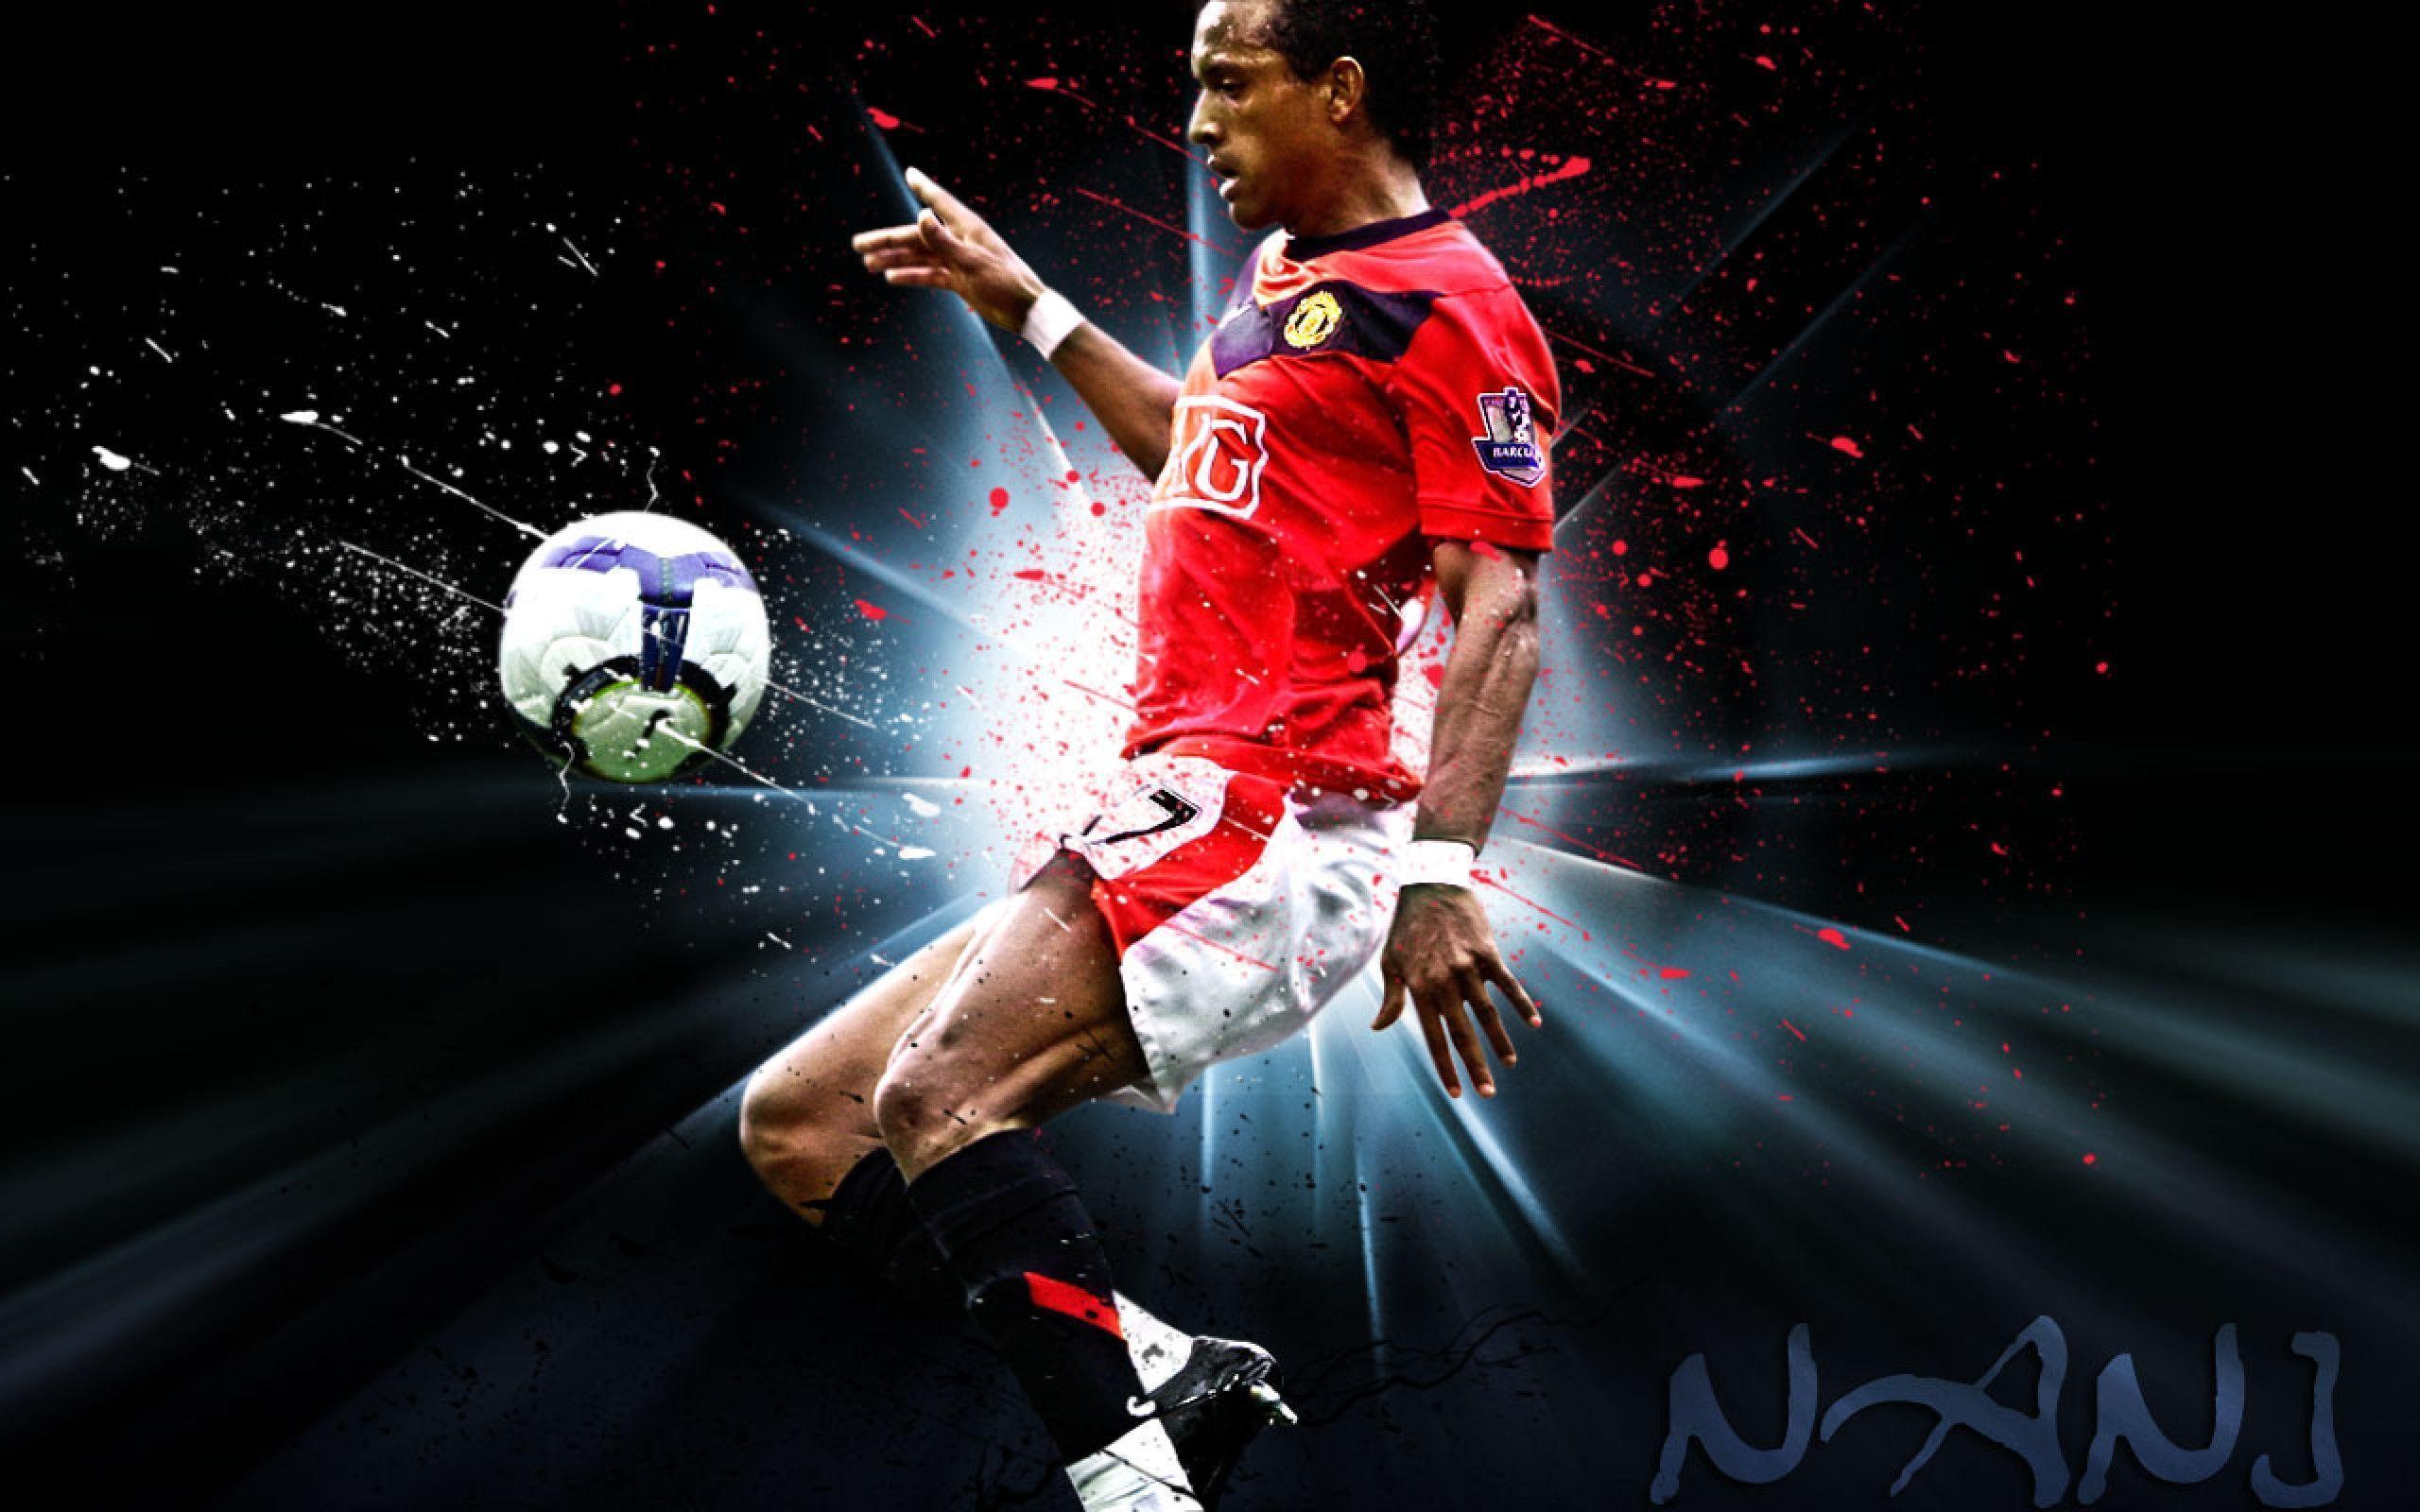 The player number 17 of Manchester United Luis Nani wallpaper